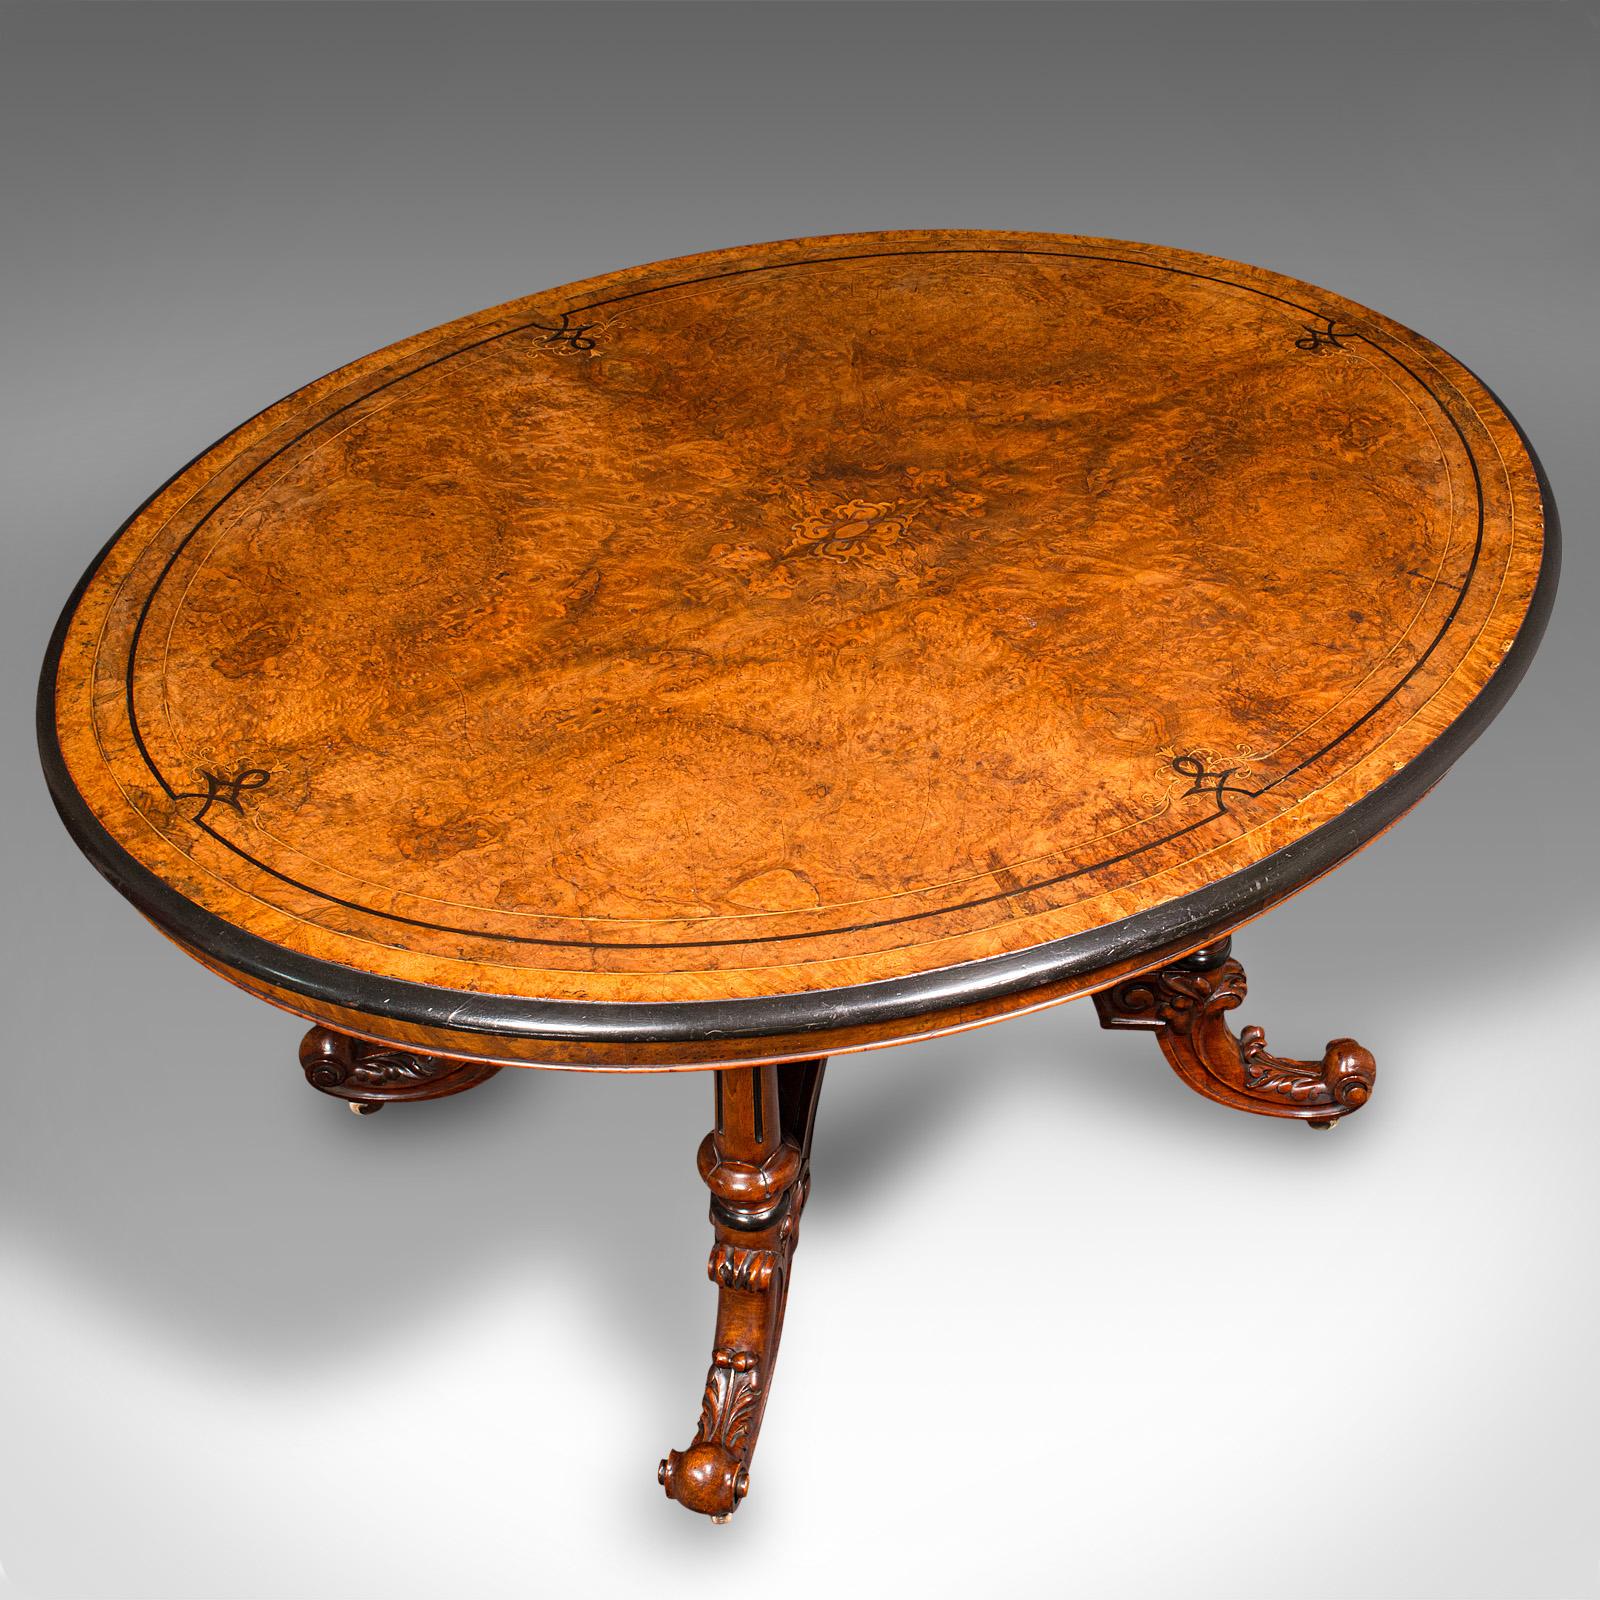 Antique Oval Looe Table, English, Walnut, 4 Seat, Centrepiece, Early Victorian For Sale 1